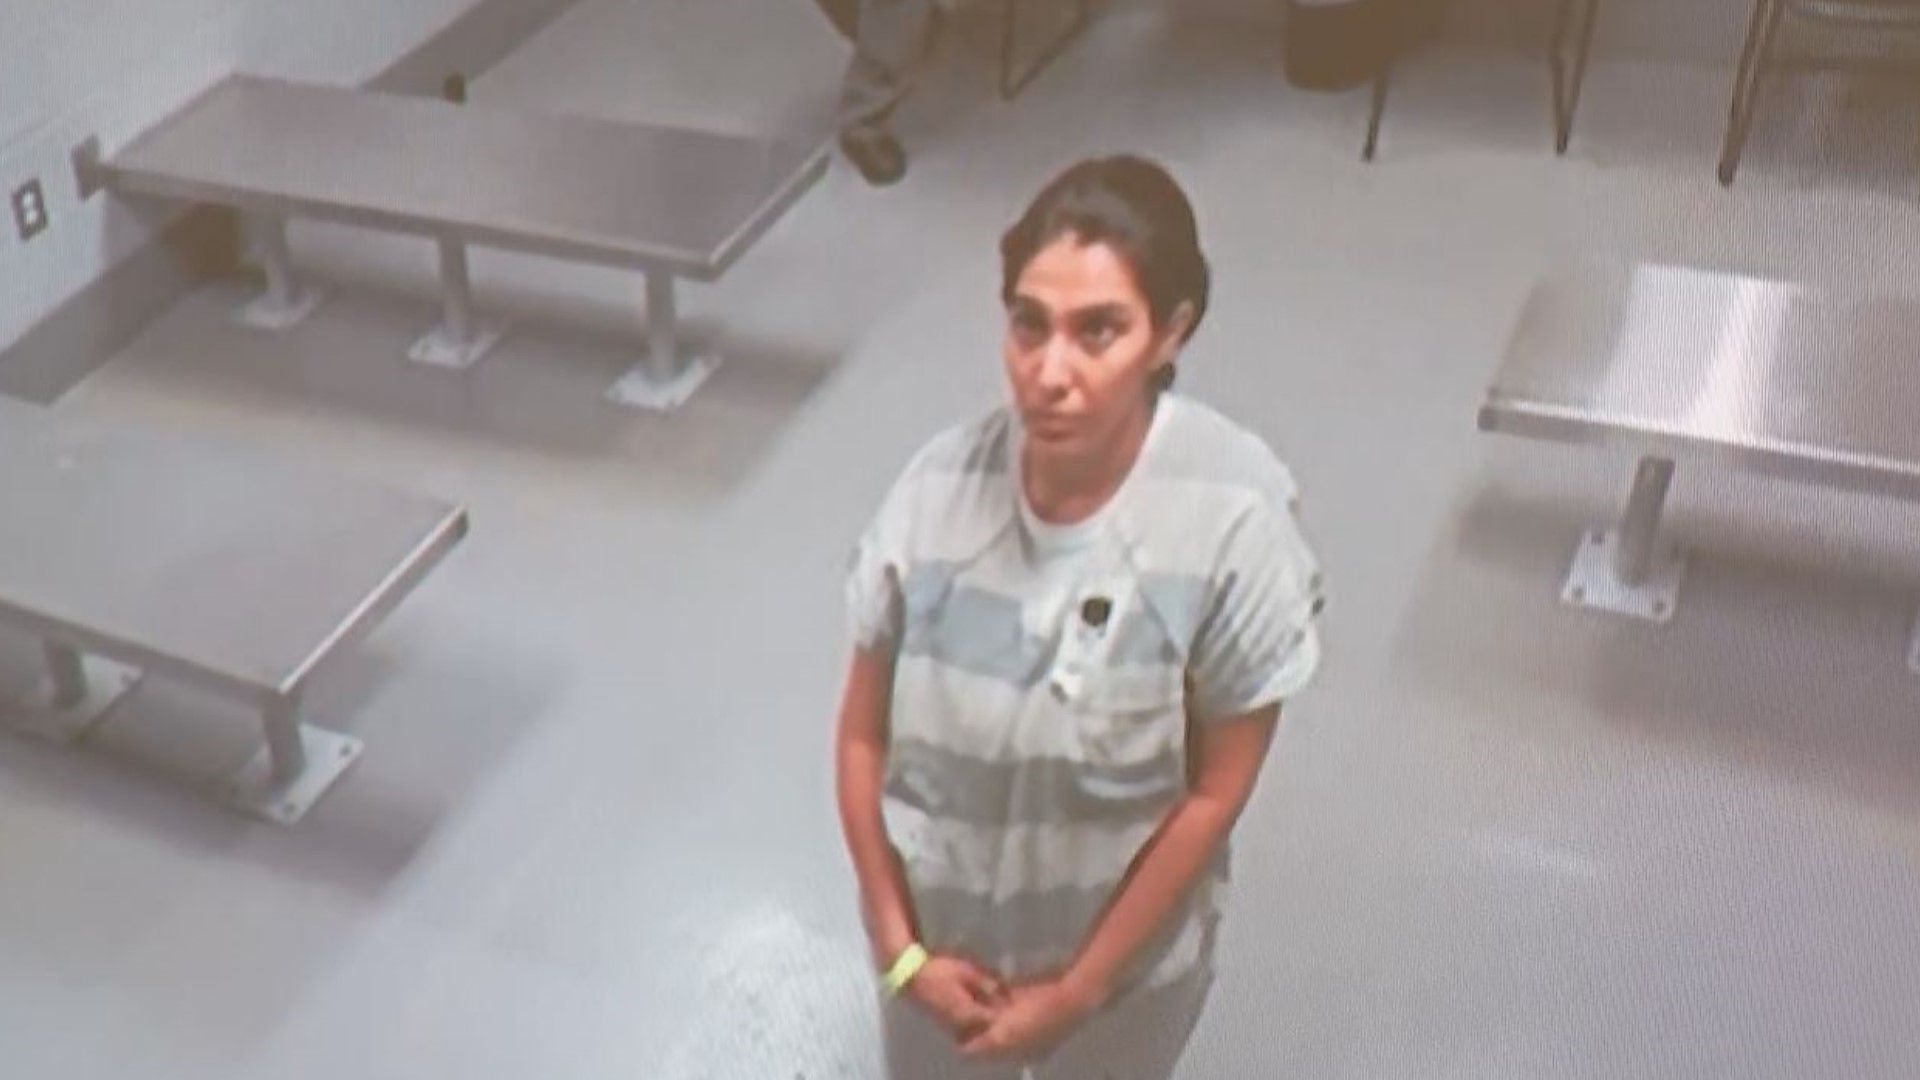 Karima Jiwani had her first court appearance Saturday where prosecutors asked the judge to deny her bond for fear she is a flight risk.